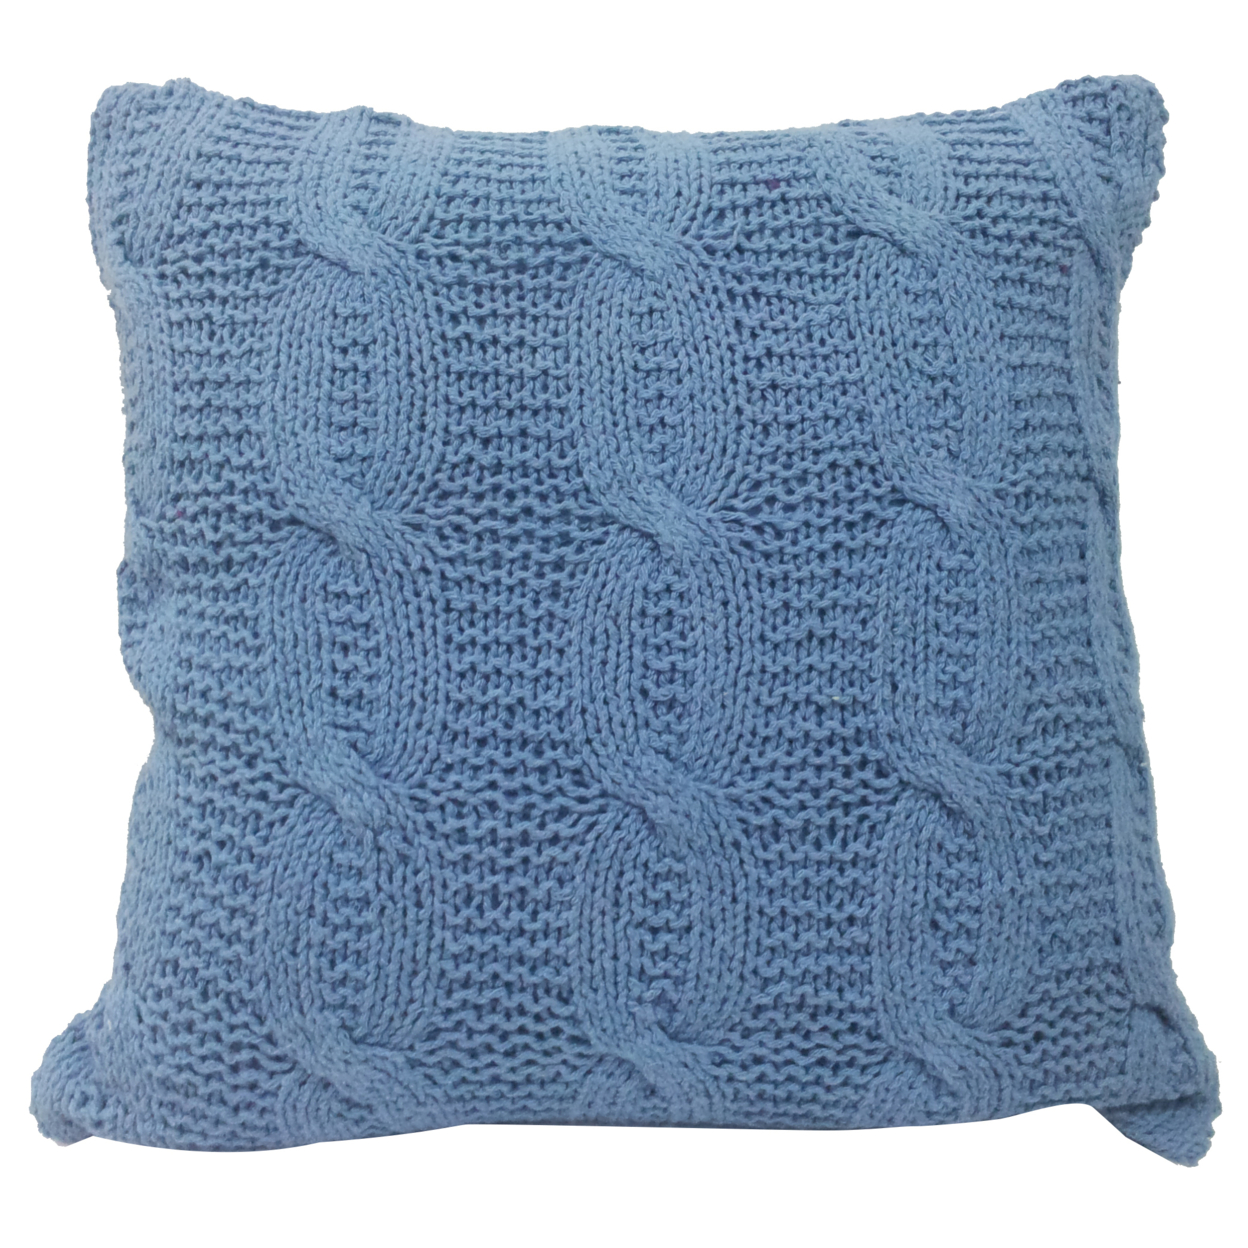 18 X 18 Inch Cotton Cable Knit Pillow With Twisted Details, Set Of 2, Blue- Saltoro Sherpi